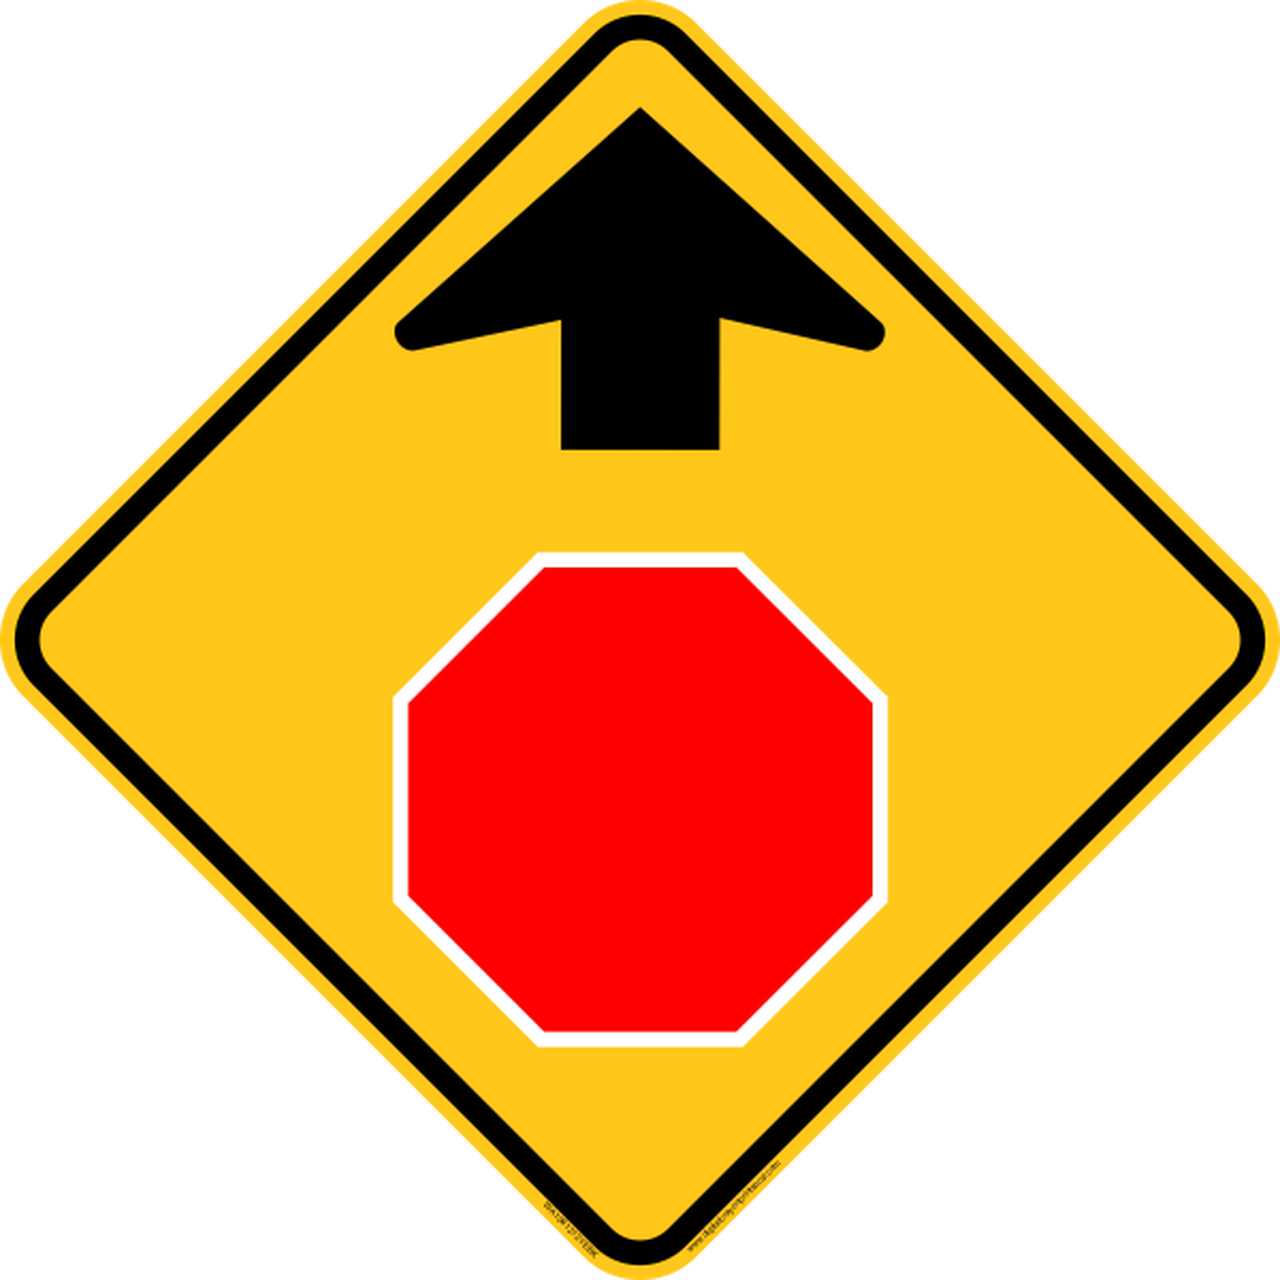 A Yellow Sign With A Red Octagon And An Arrow